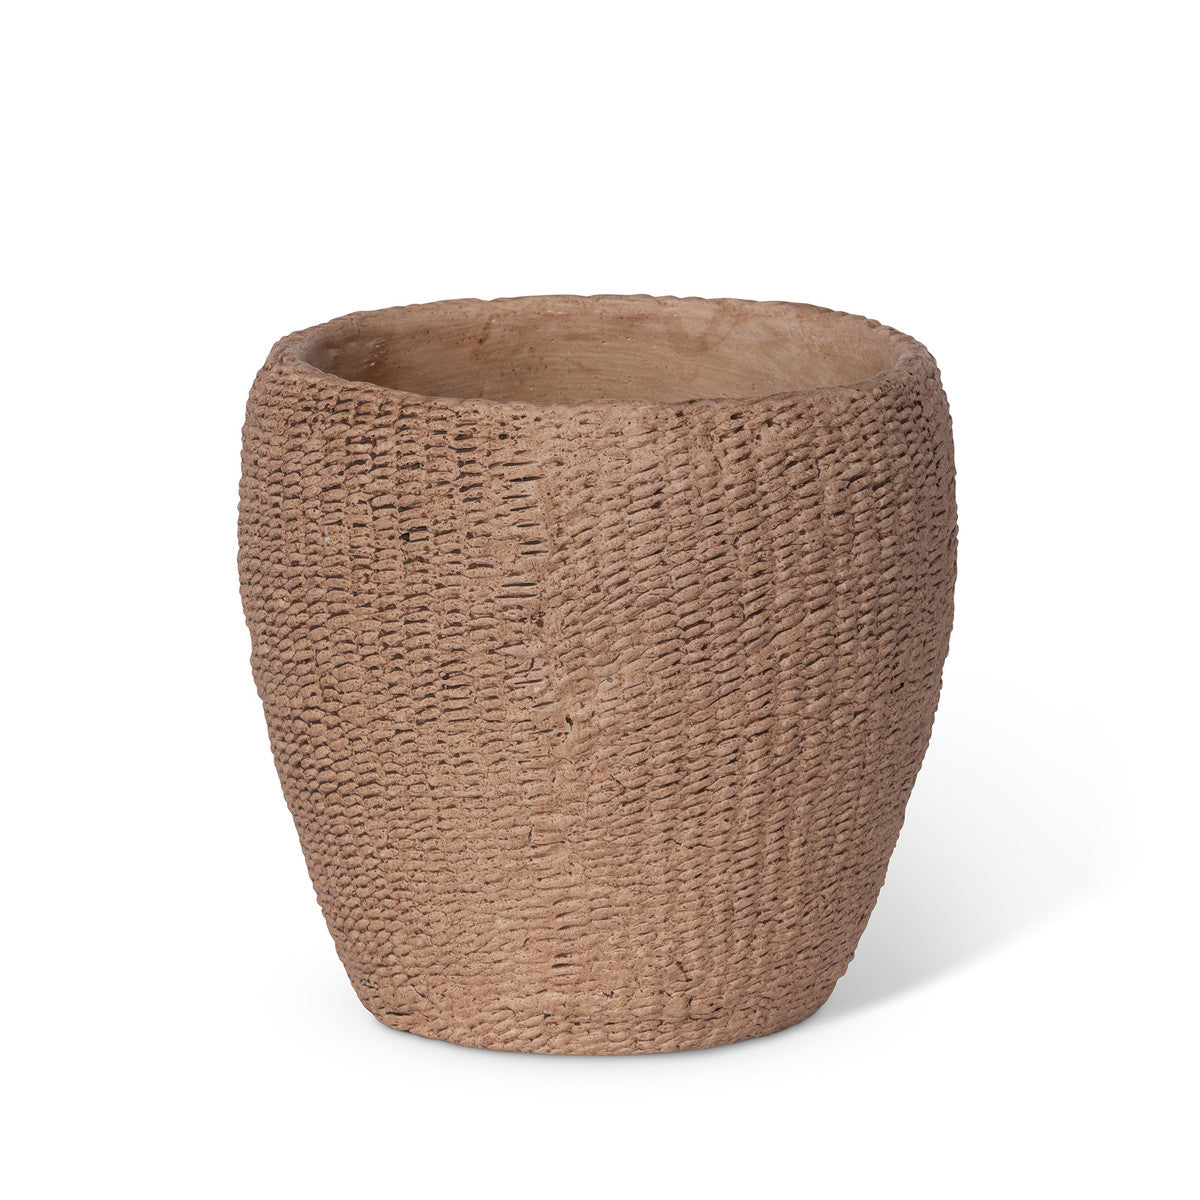 Seagrass Relief Pattern Cement Pot - 8"